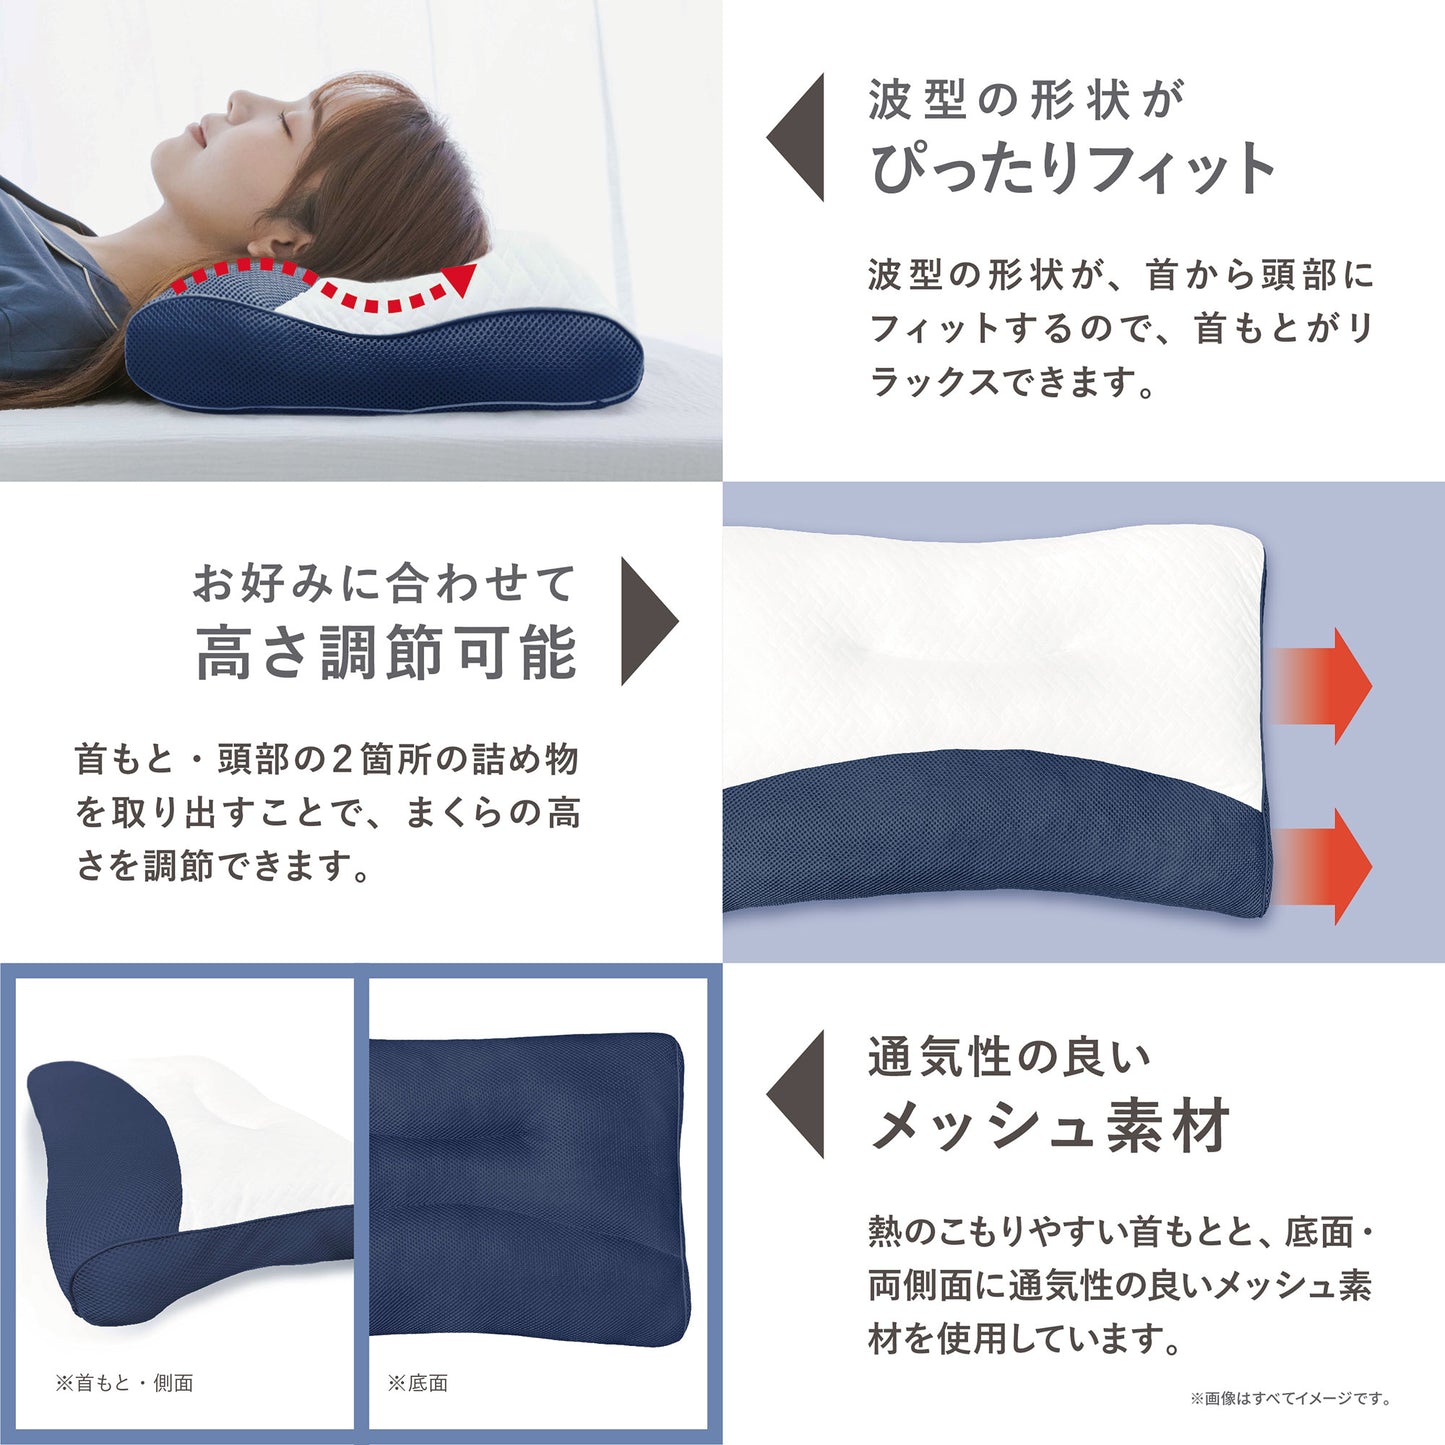 Pipe type pillow to rest your neck